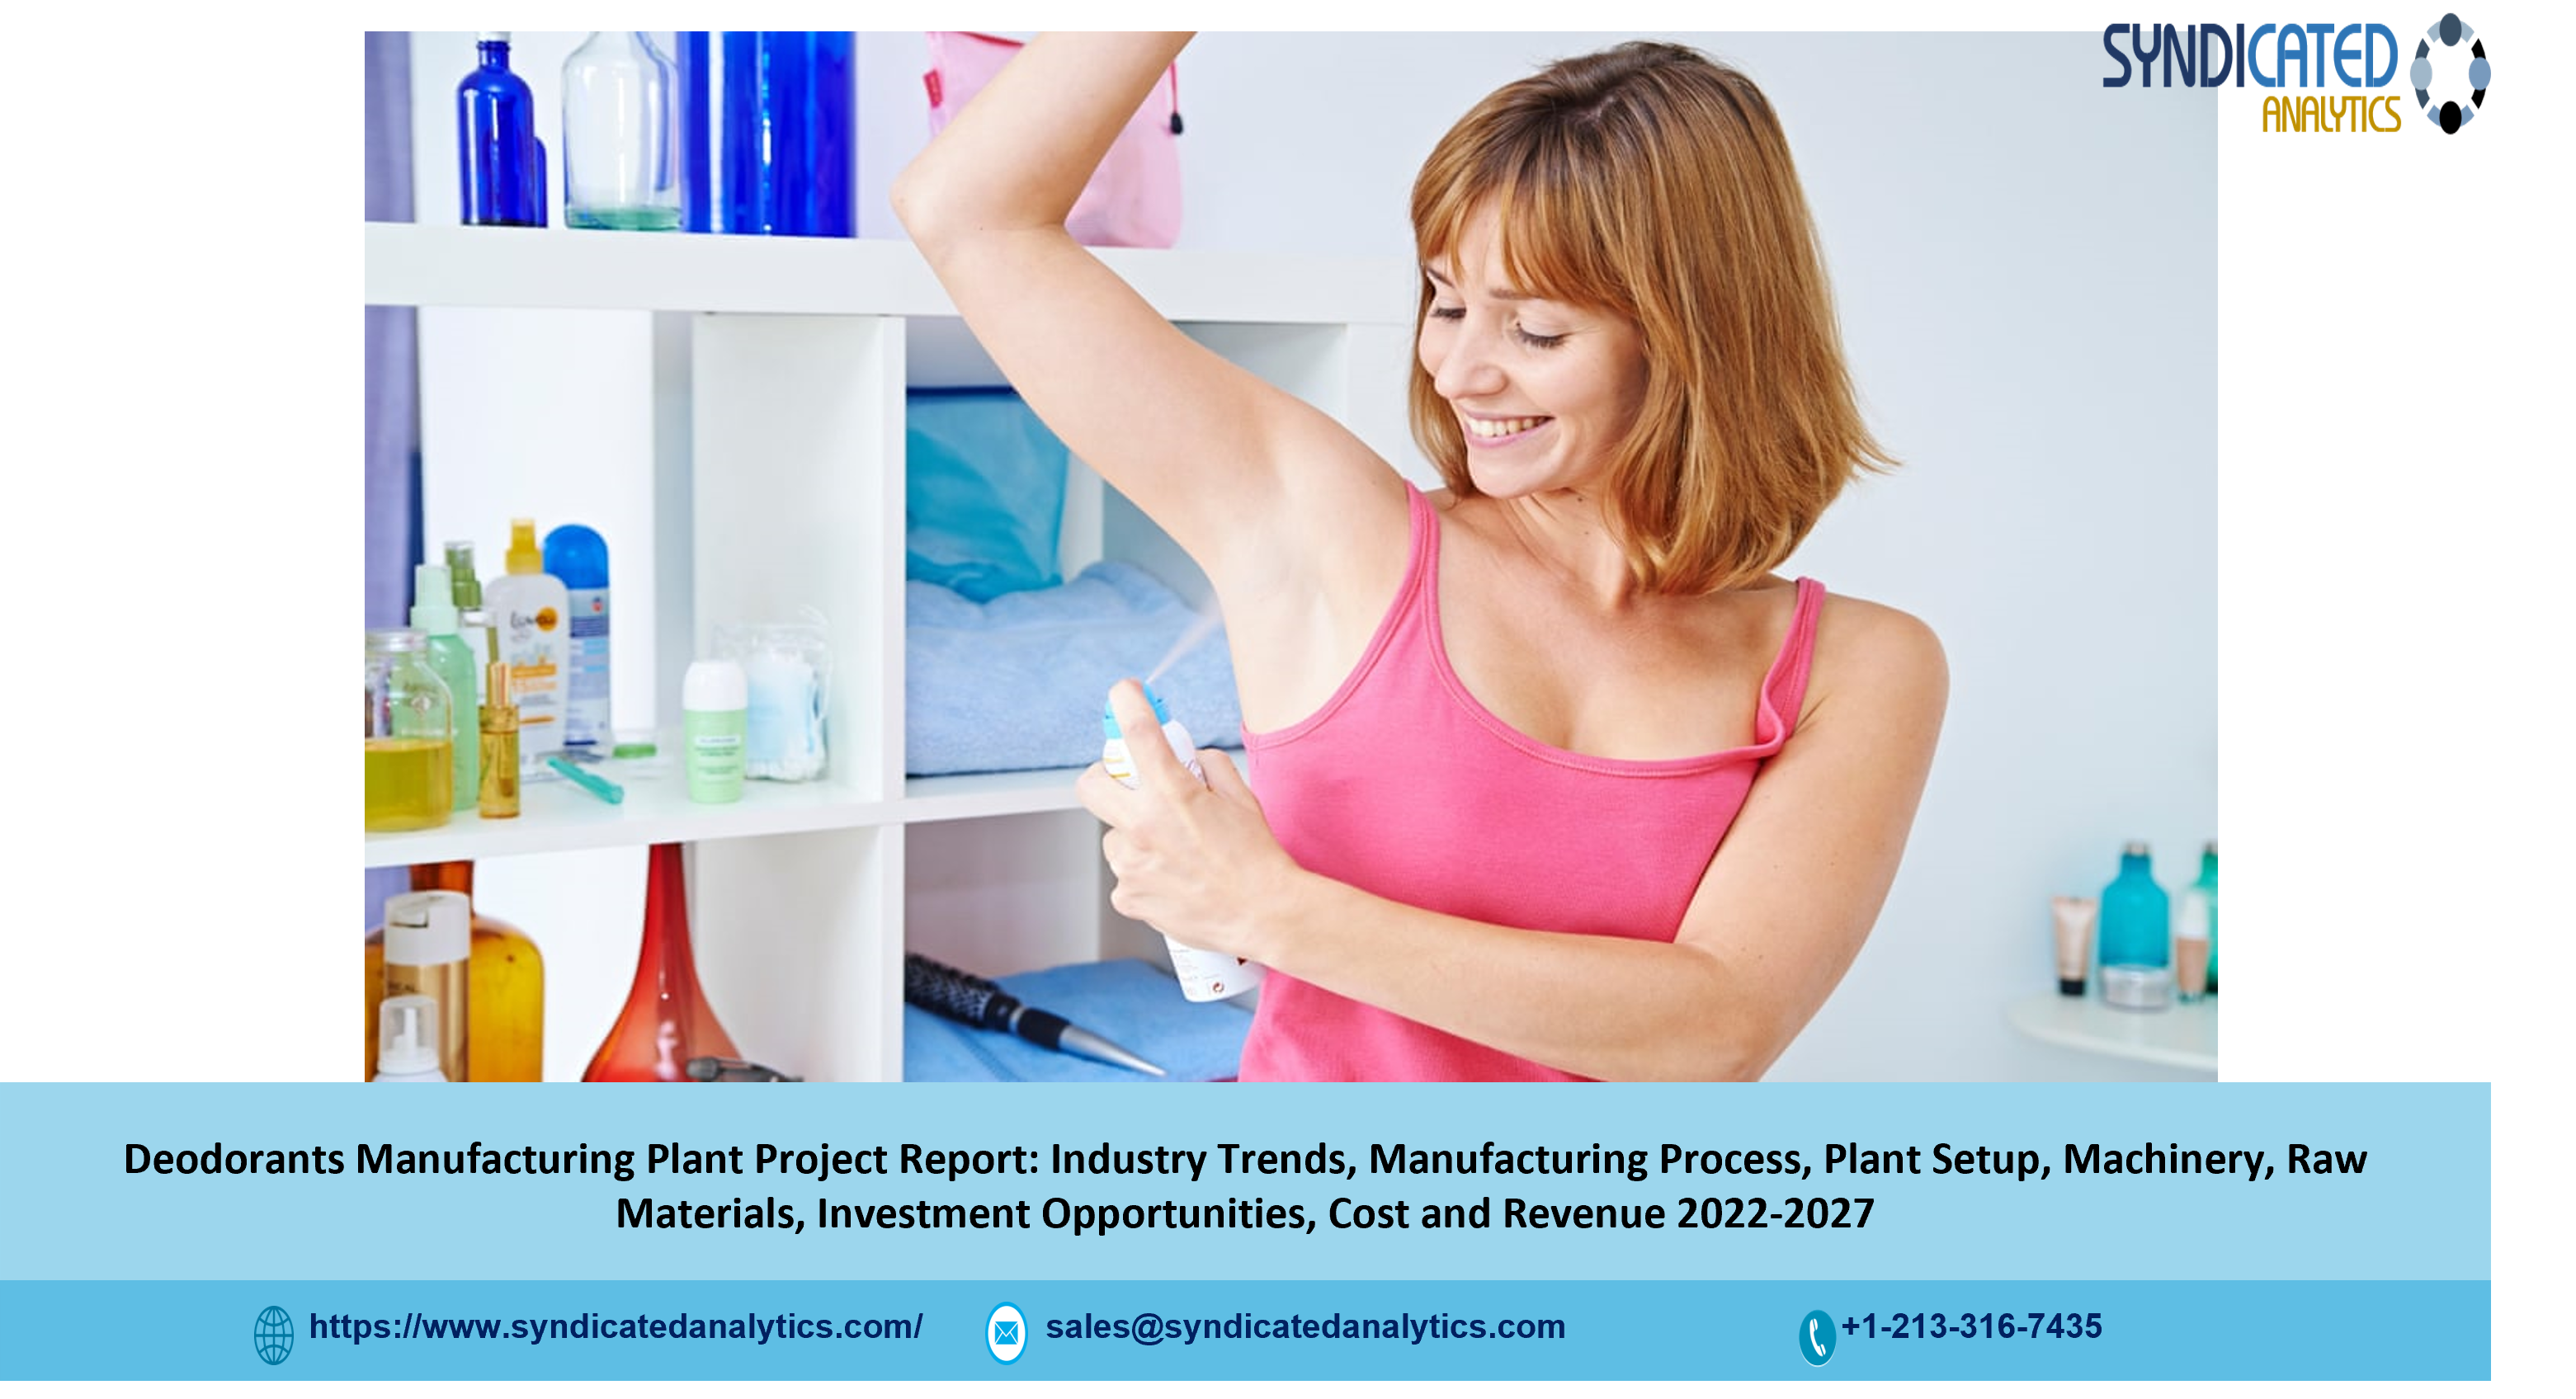 Deodorant Manufacturing Plant Cost and Project Report 2022-2027: Plant Setup, Business Plan, Plant Cost, Industry Trends, Raw Materials, Cost and Revenue, Machinery Requirements - Syndicated Analytics